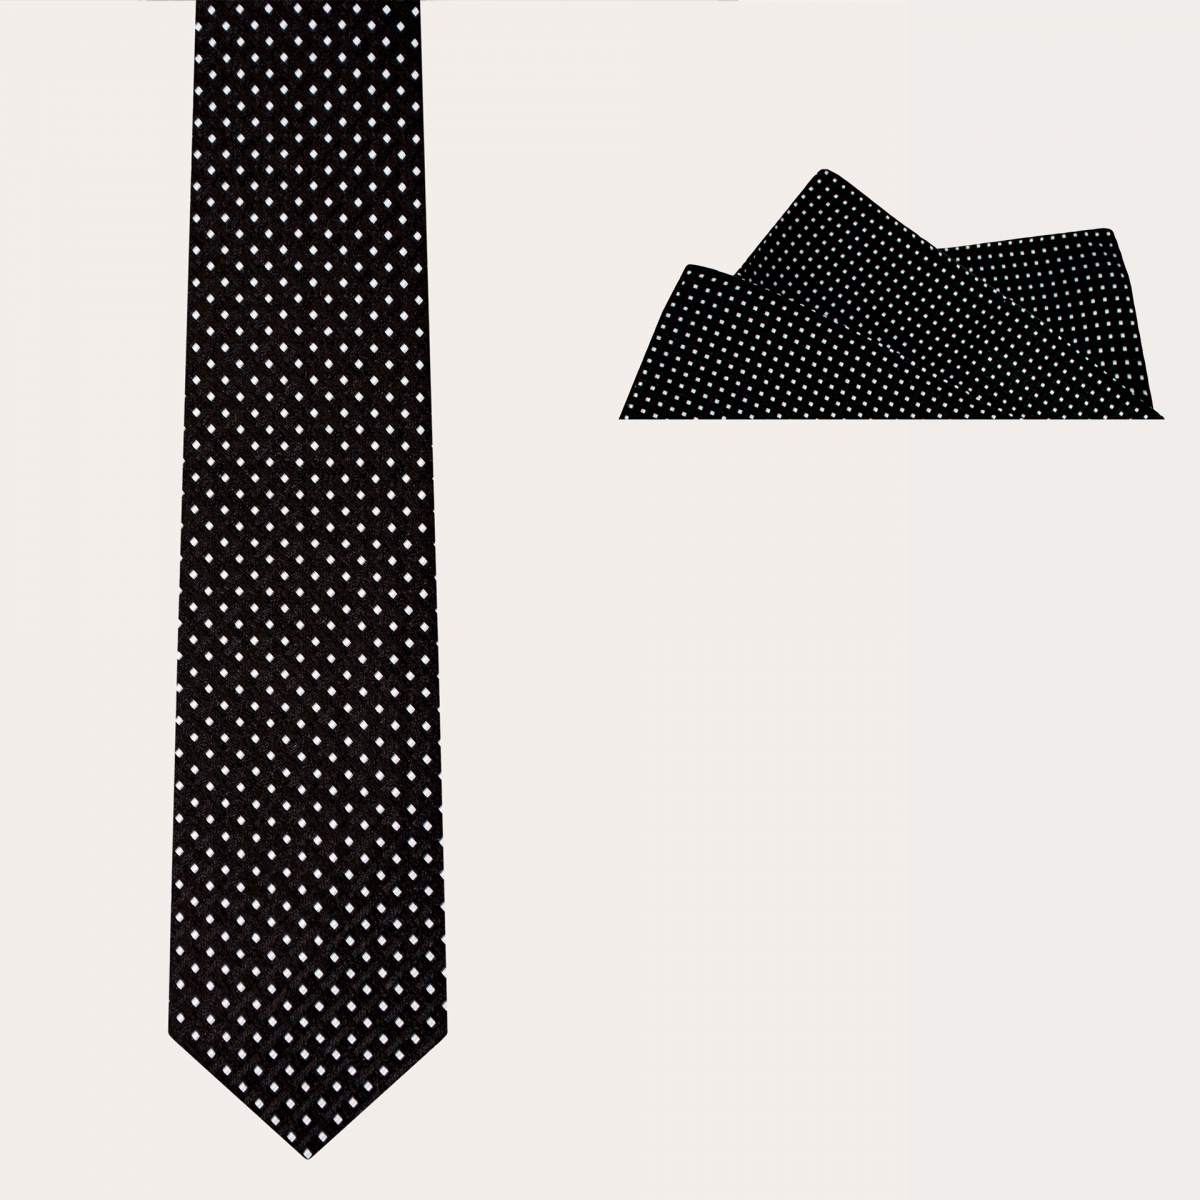 BRUCLE Ceremony set tie and pocket square, black with geometric dotted pattern